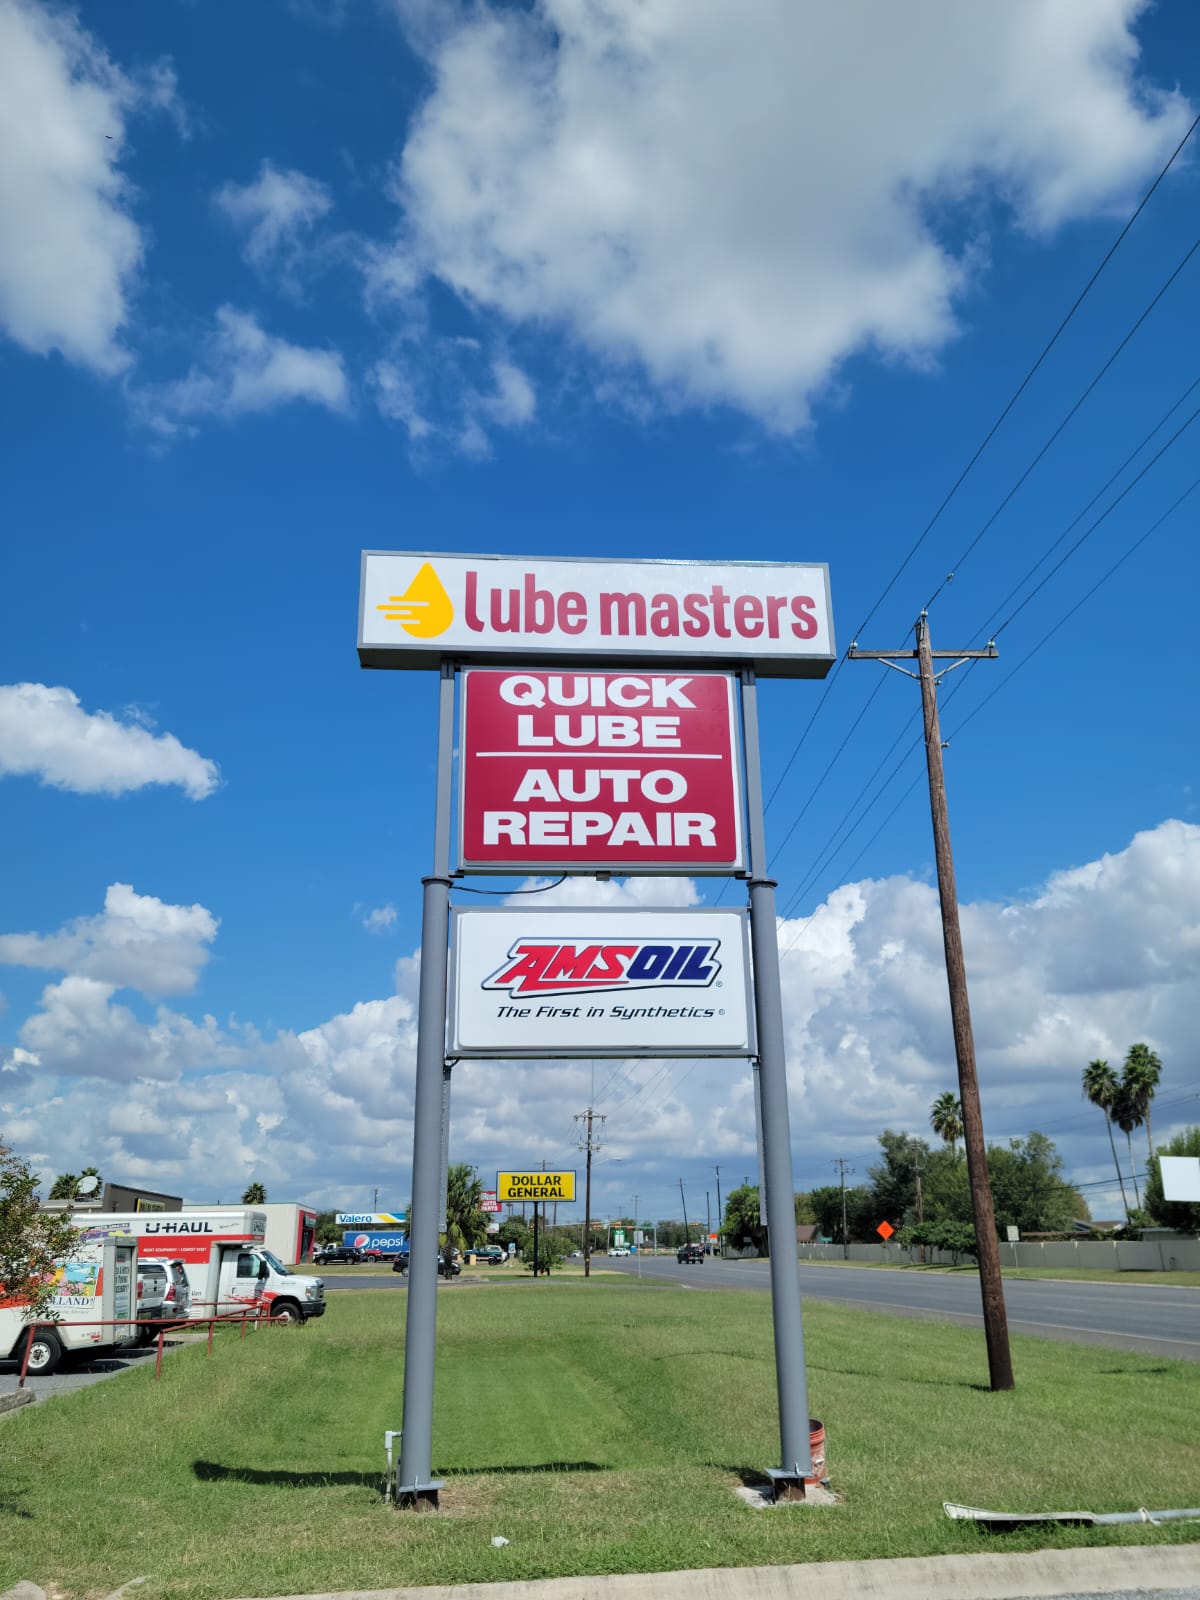 Fabricated and erected a multi-tiered pylon sign for Lube Masters, enhancing service visibility and brand prominence.